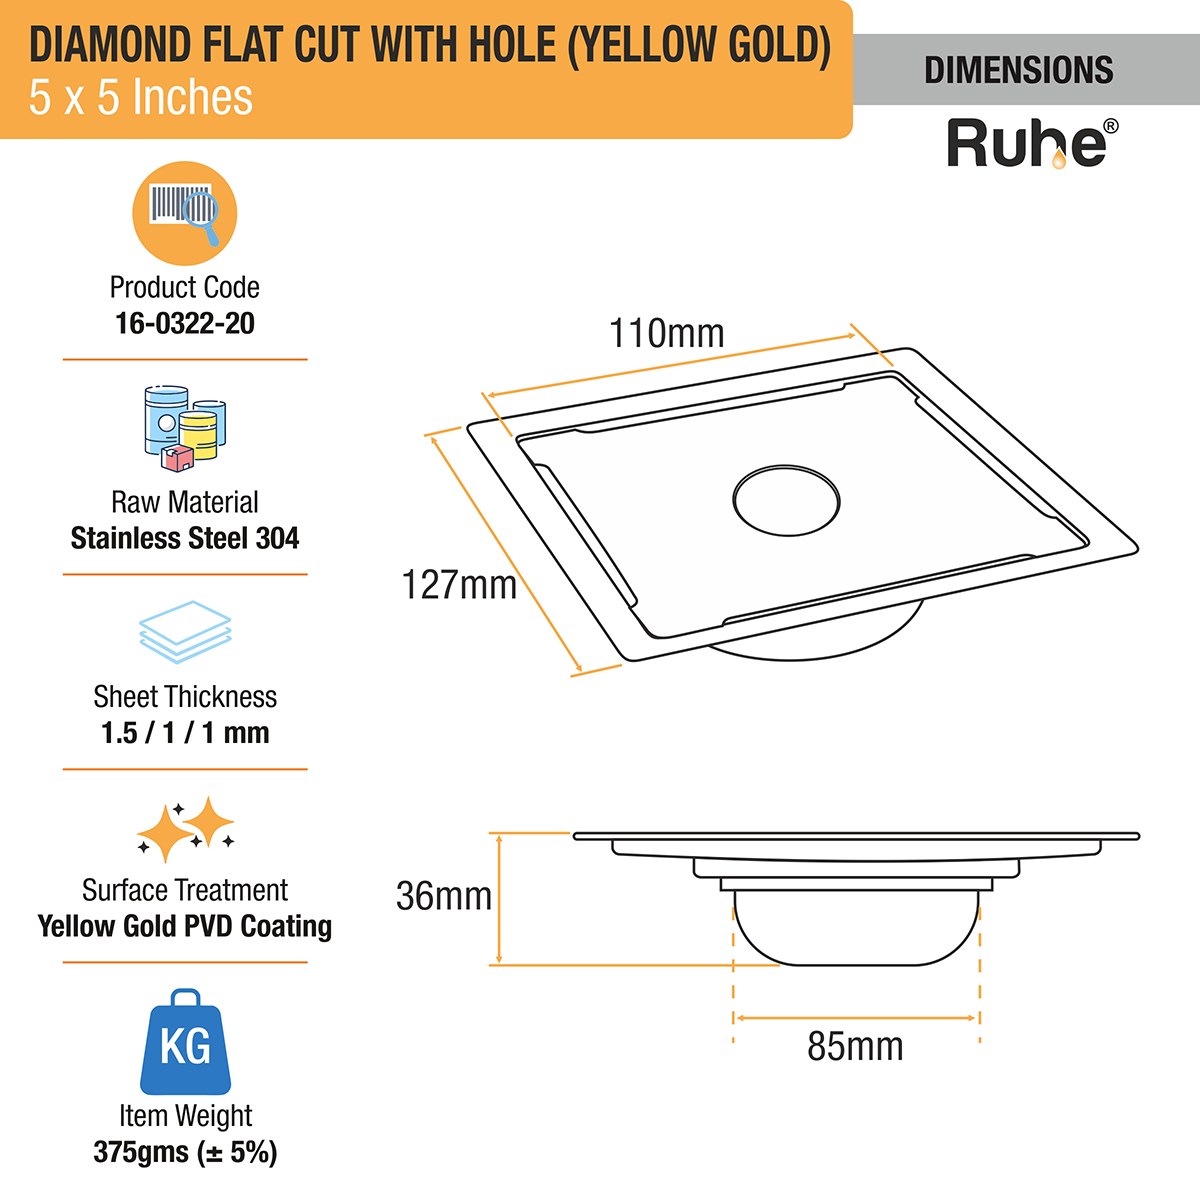 Diamond Square Flat Cut Floor Drain in Yellow Gold PVD Coating (5 x 5 Inches) with Hole dimensions and sizes